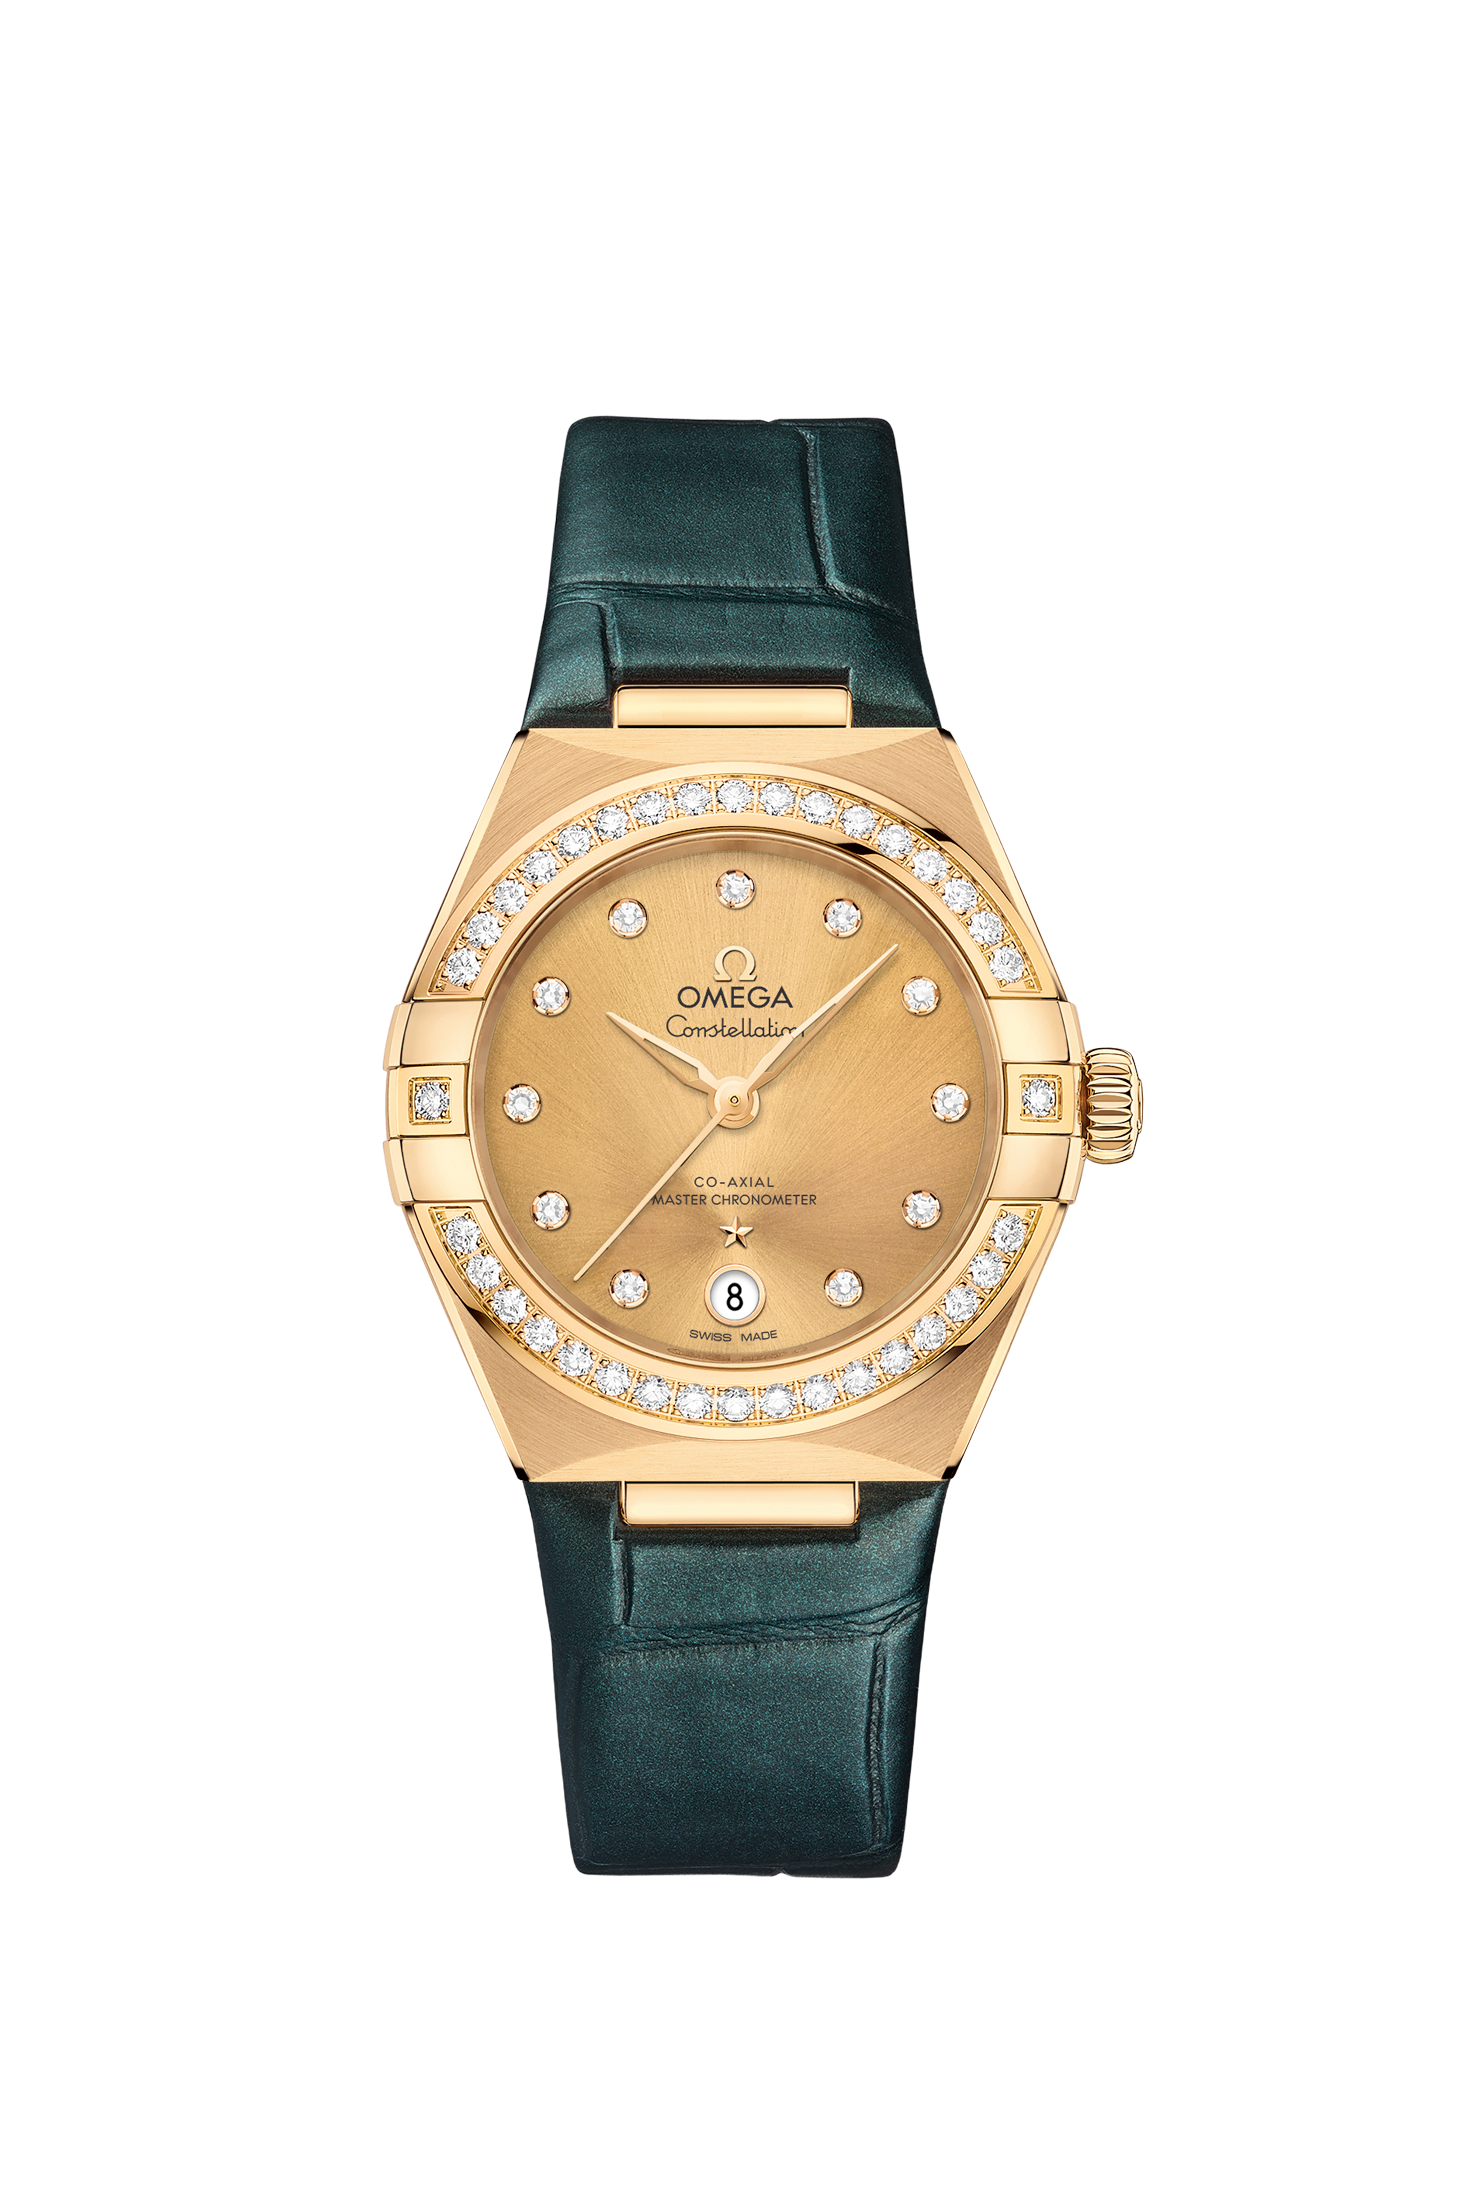 Ladies' watch  OMEGA, Constellation Co Axial Master Chronometer / 29mm, SKU: 131.58.29.20.58.001 | watchapproach.com